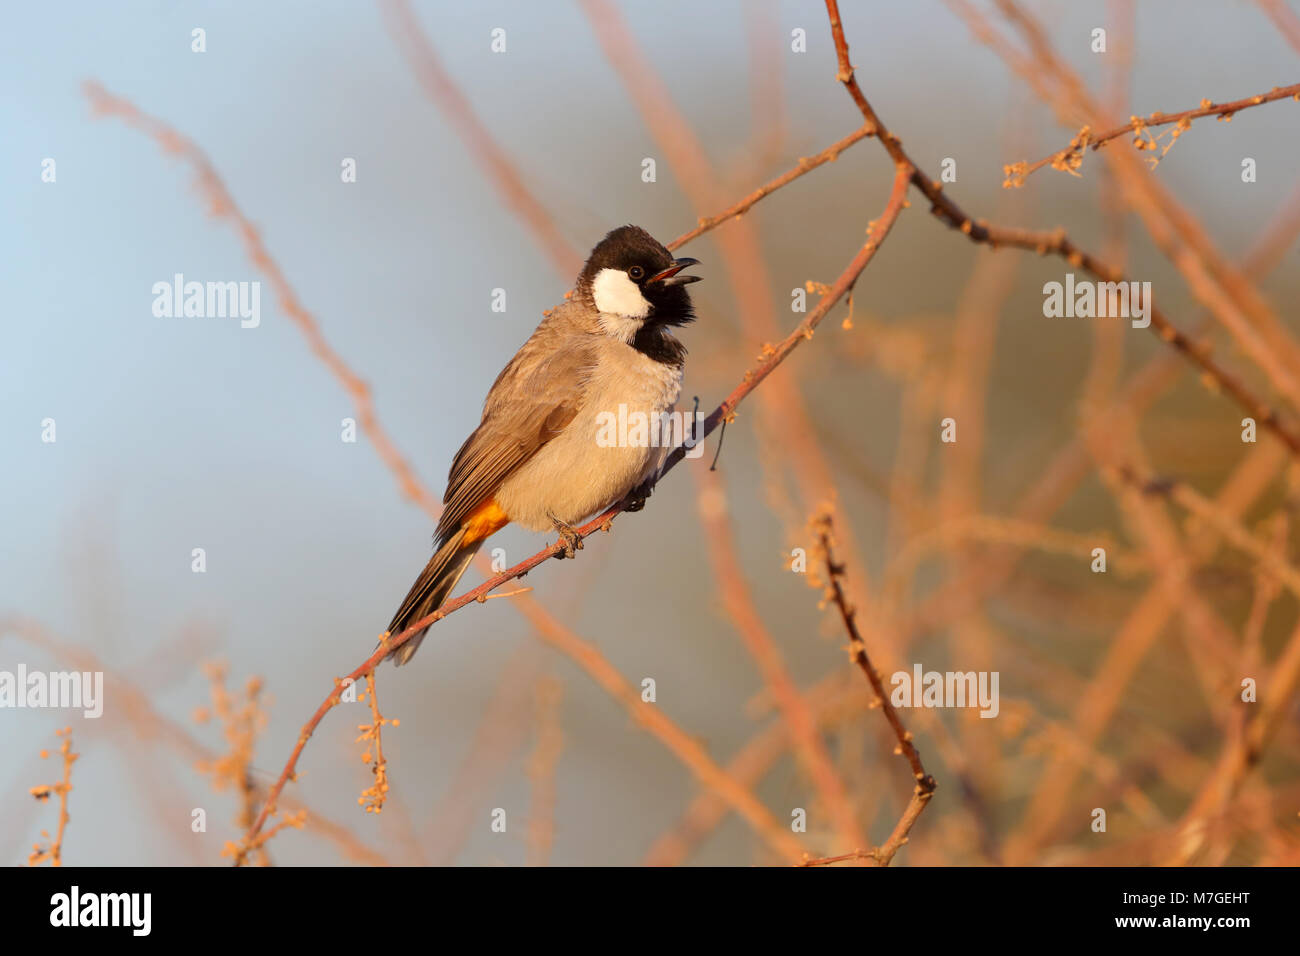 An adult White-eared or White-cheeked Bulbul in a bush in Rajasthan, India Stock Photo